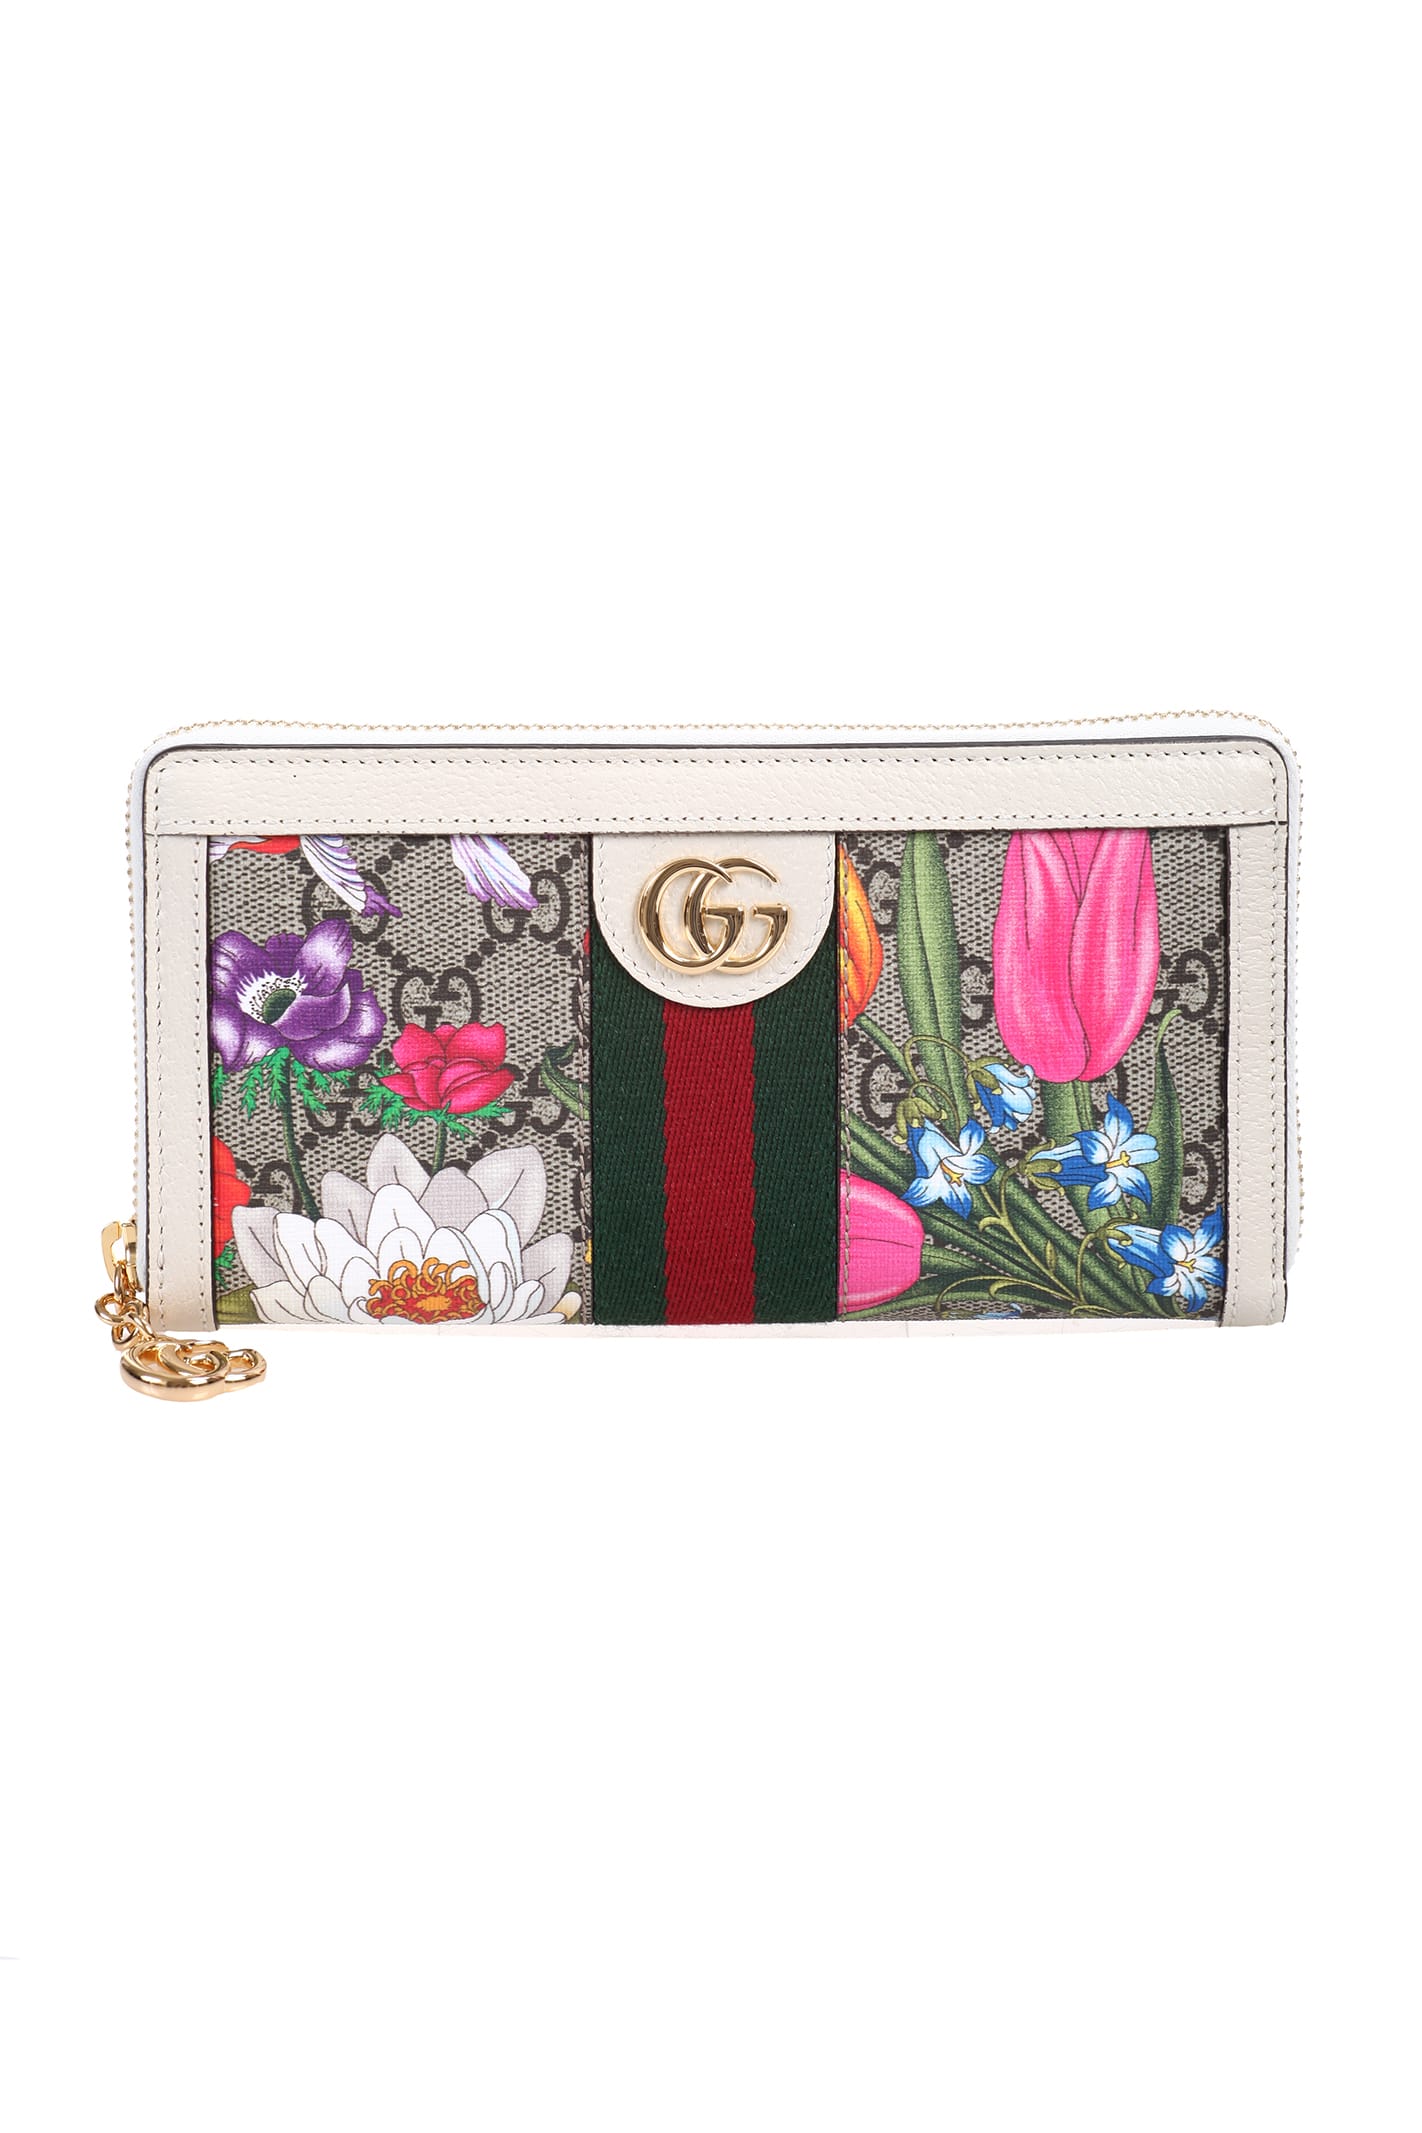 GUCCI OPHIDIA WALLET,11210106